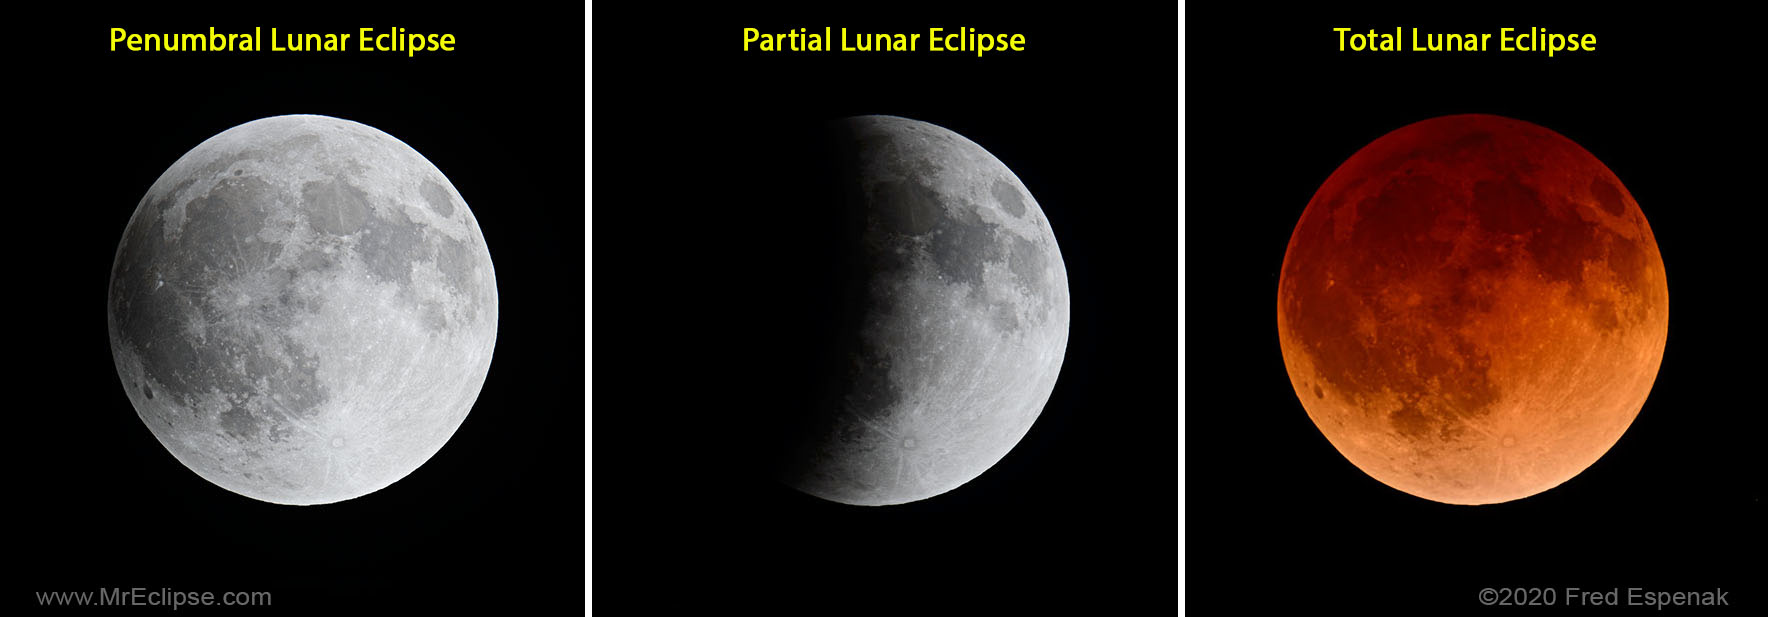 types of lunar eclipses